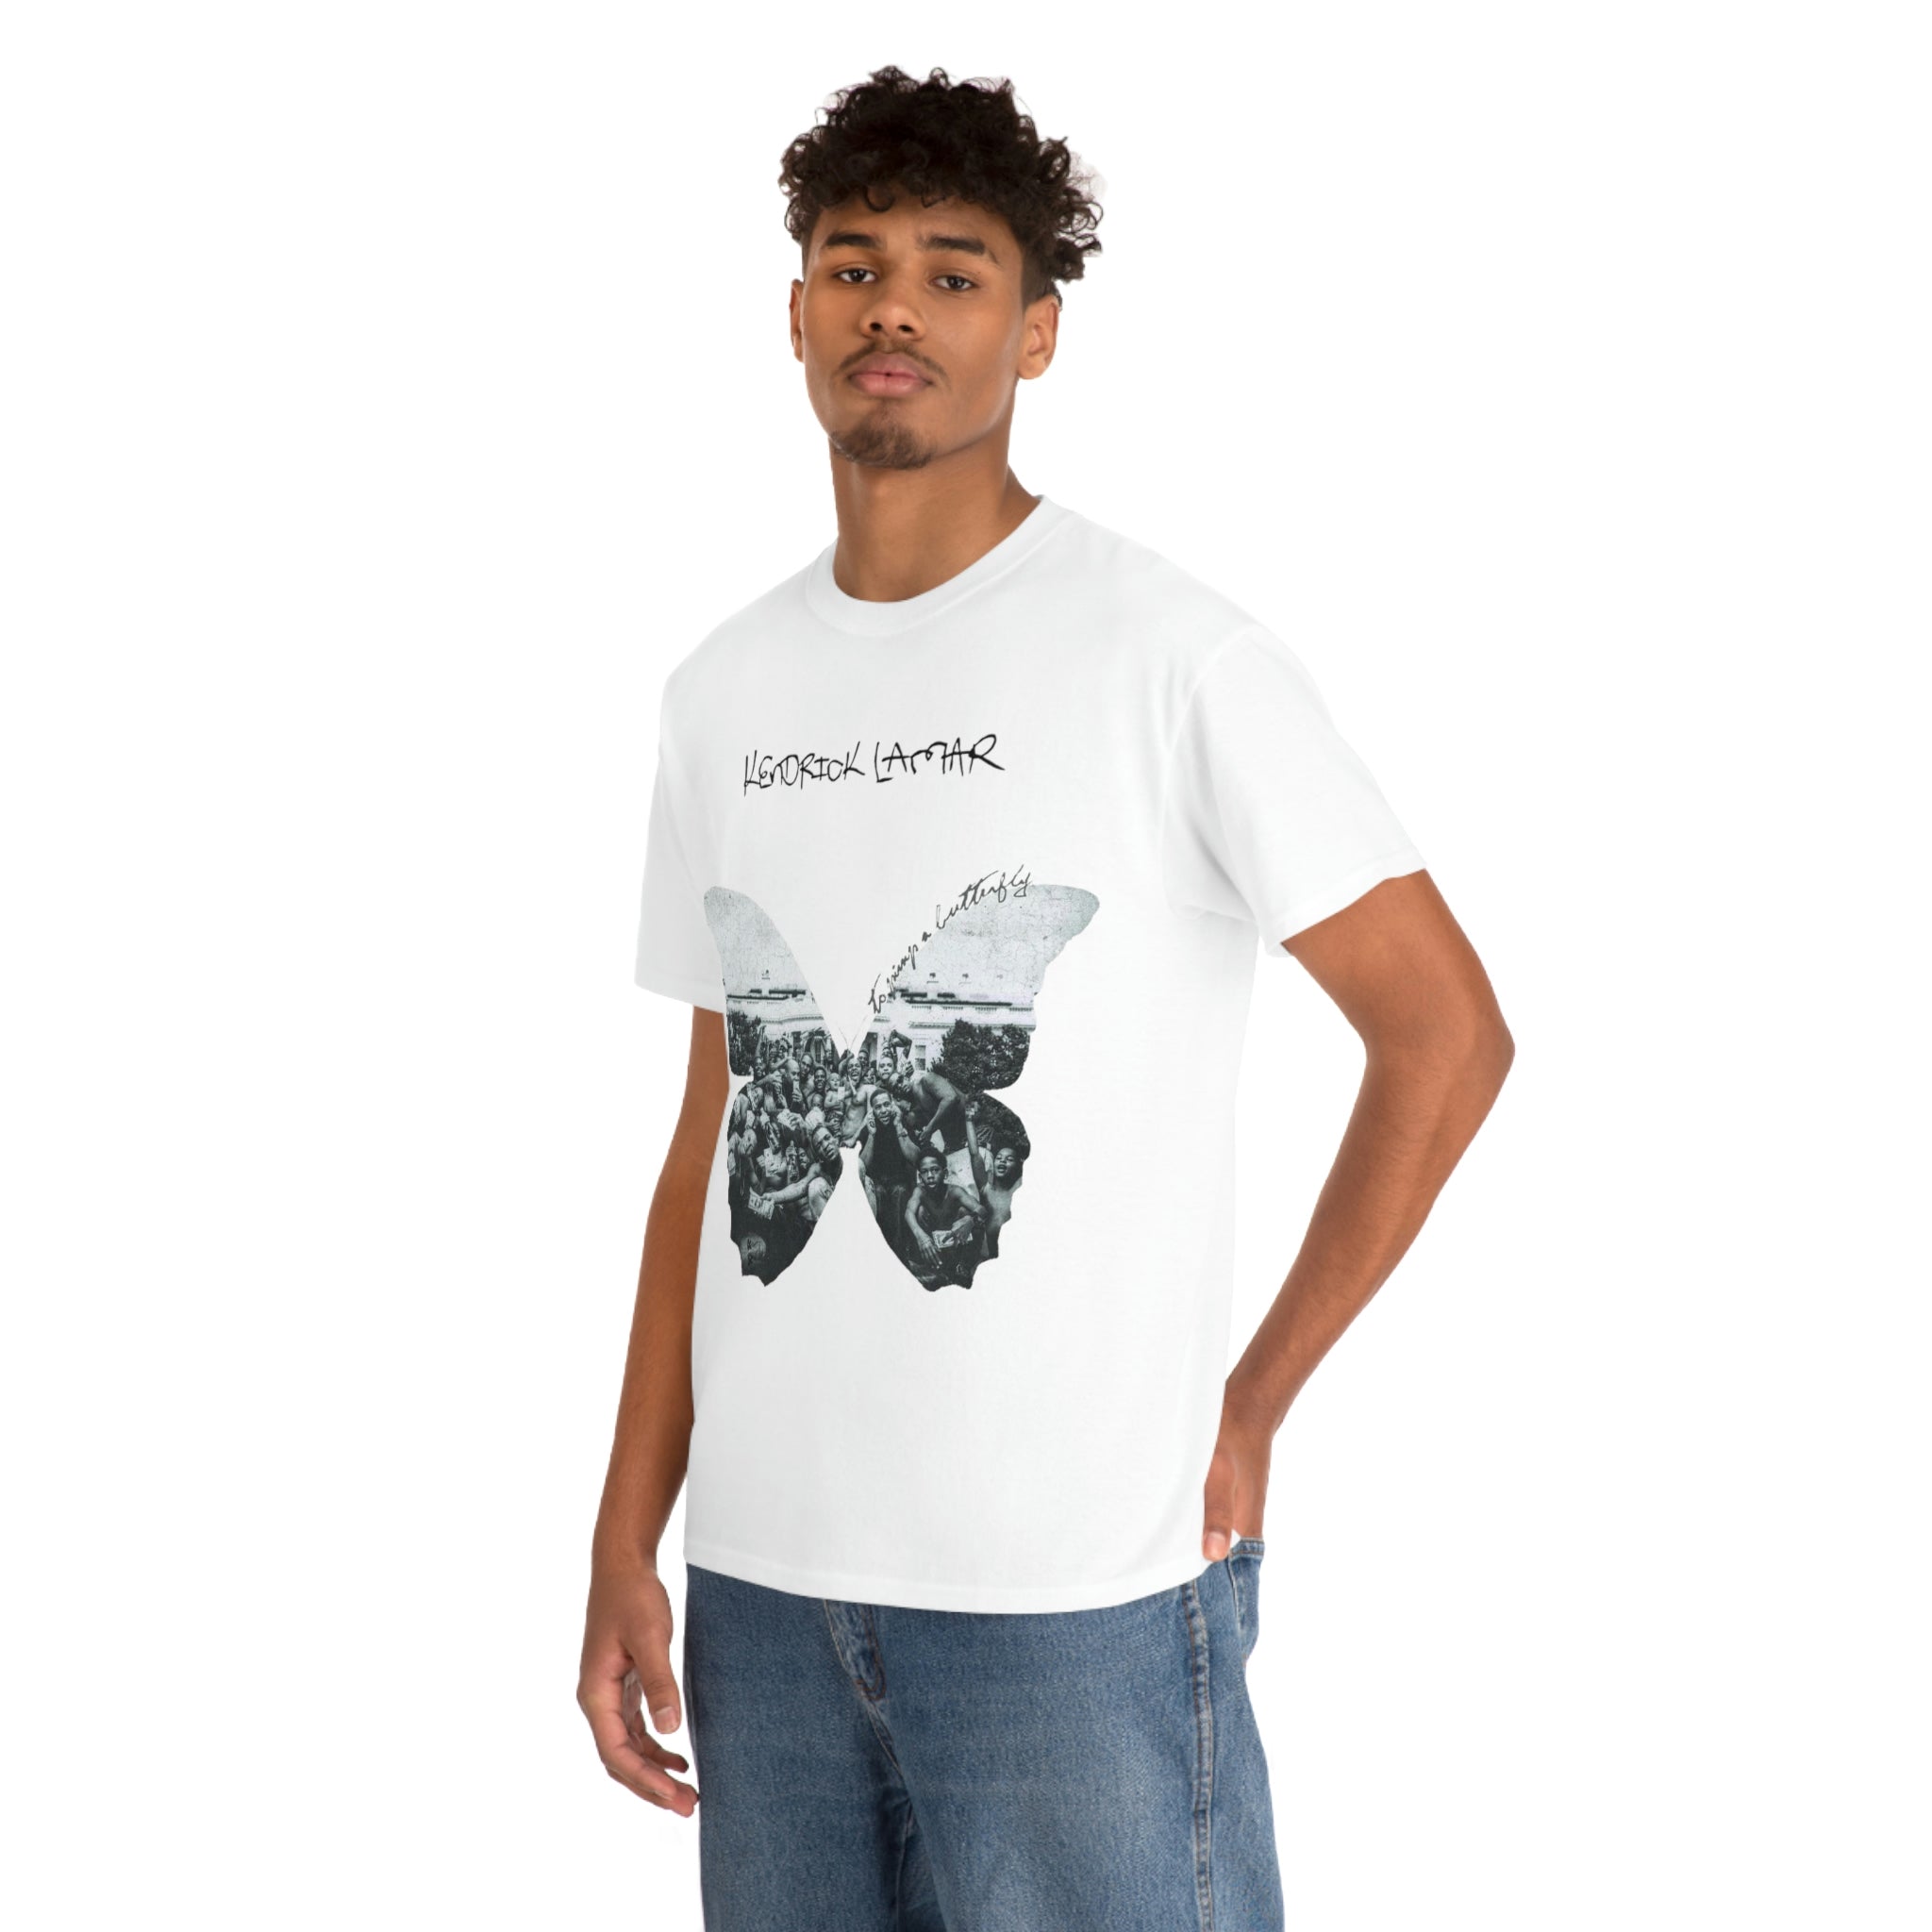 Kendrick Lamar To Pimp A Butterfly T-Shirt – NorthIcon Apparel